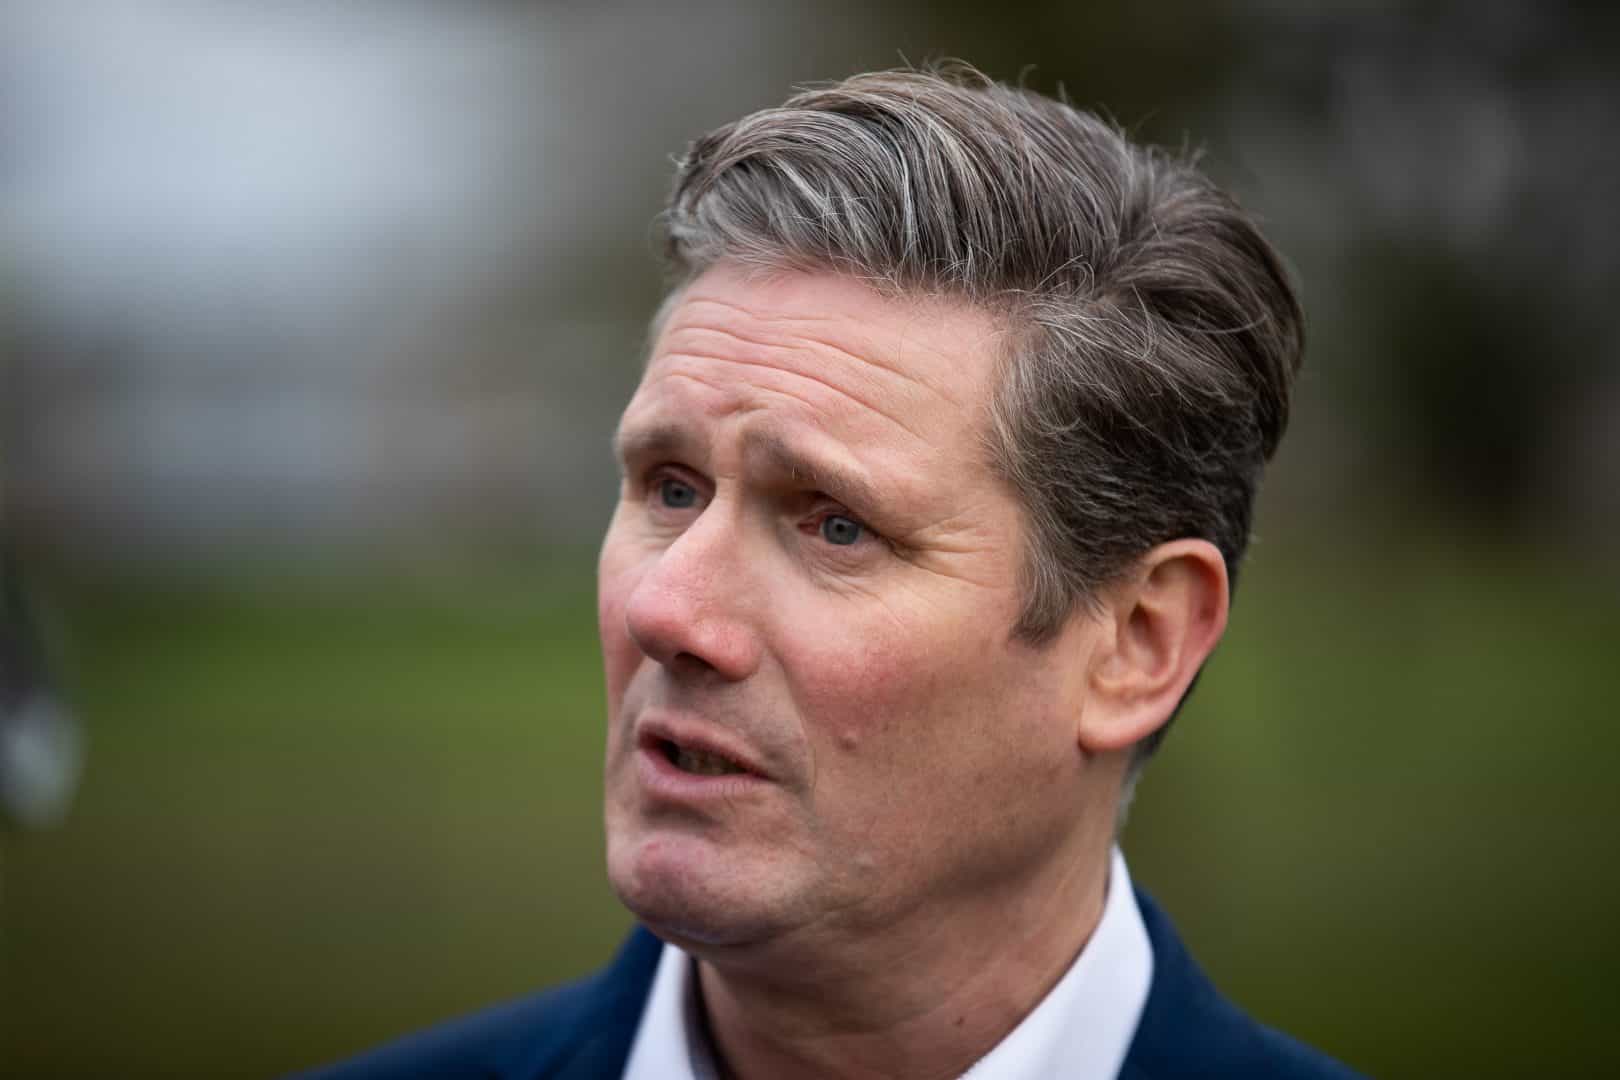 Sir Keir Starmer’s mother-in-law dies following accident